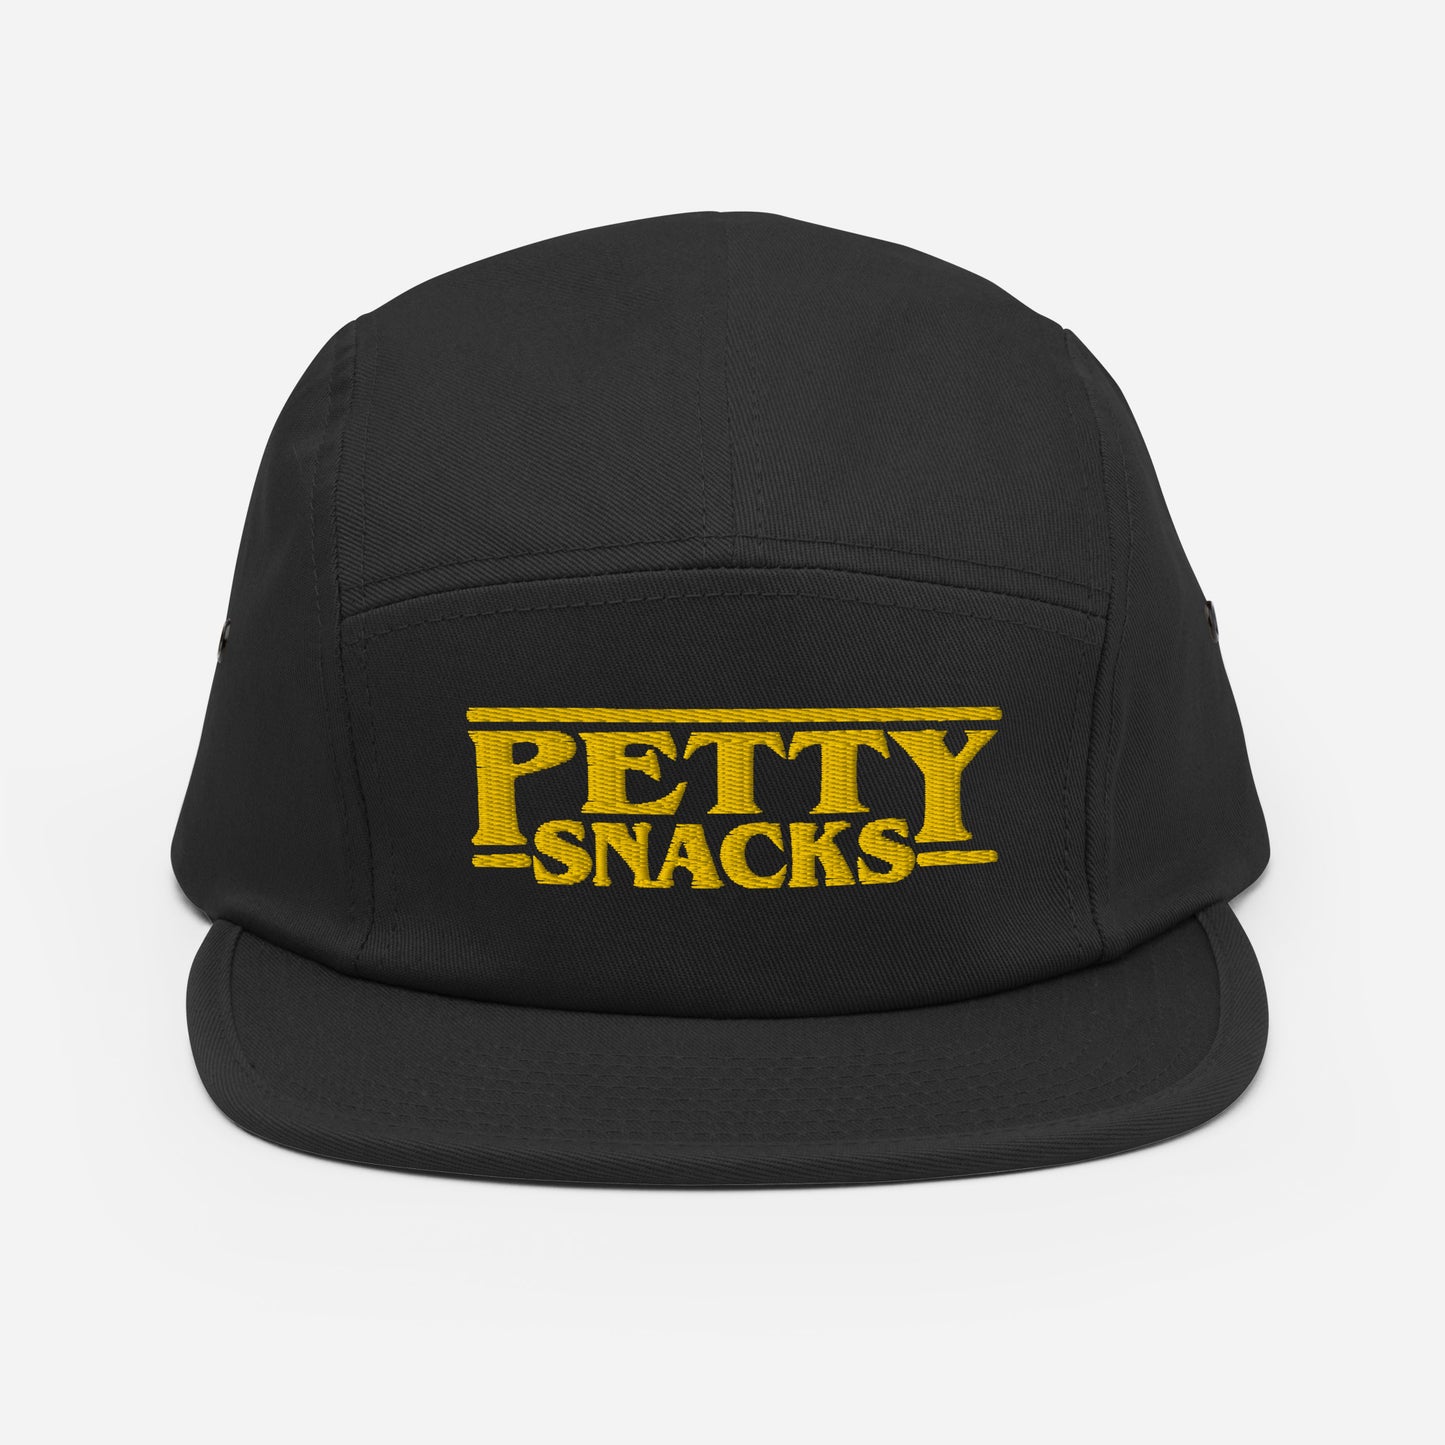 A black five-panel hat with embroidered lettering in front center. Letterings says "Petty Snacks" in yellow with a line on top and bottom of the words. In the style of film credits made famous by Tarantino.